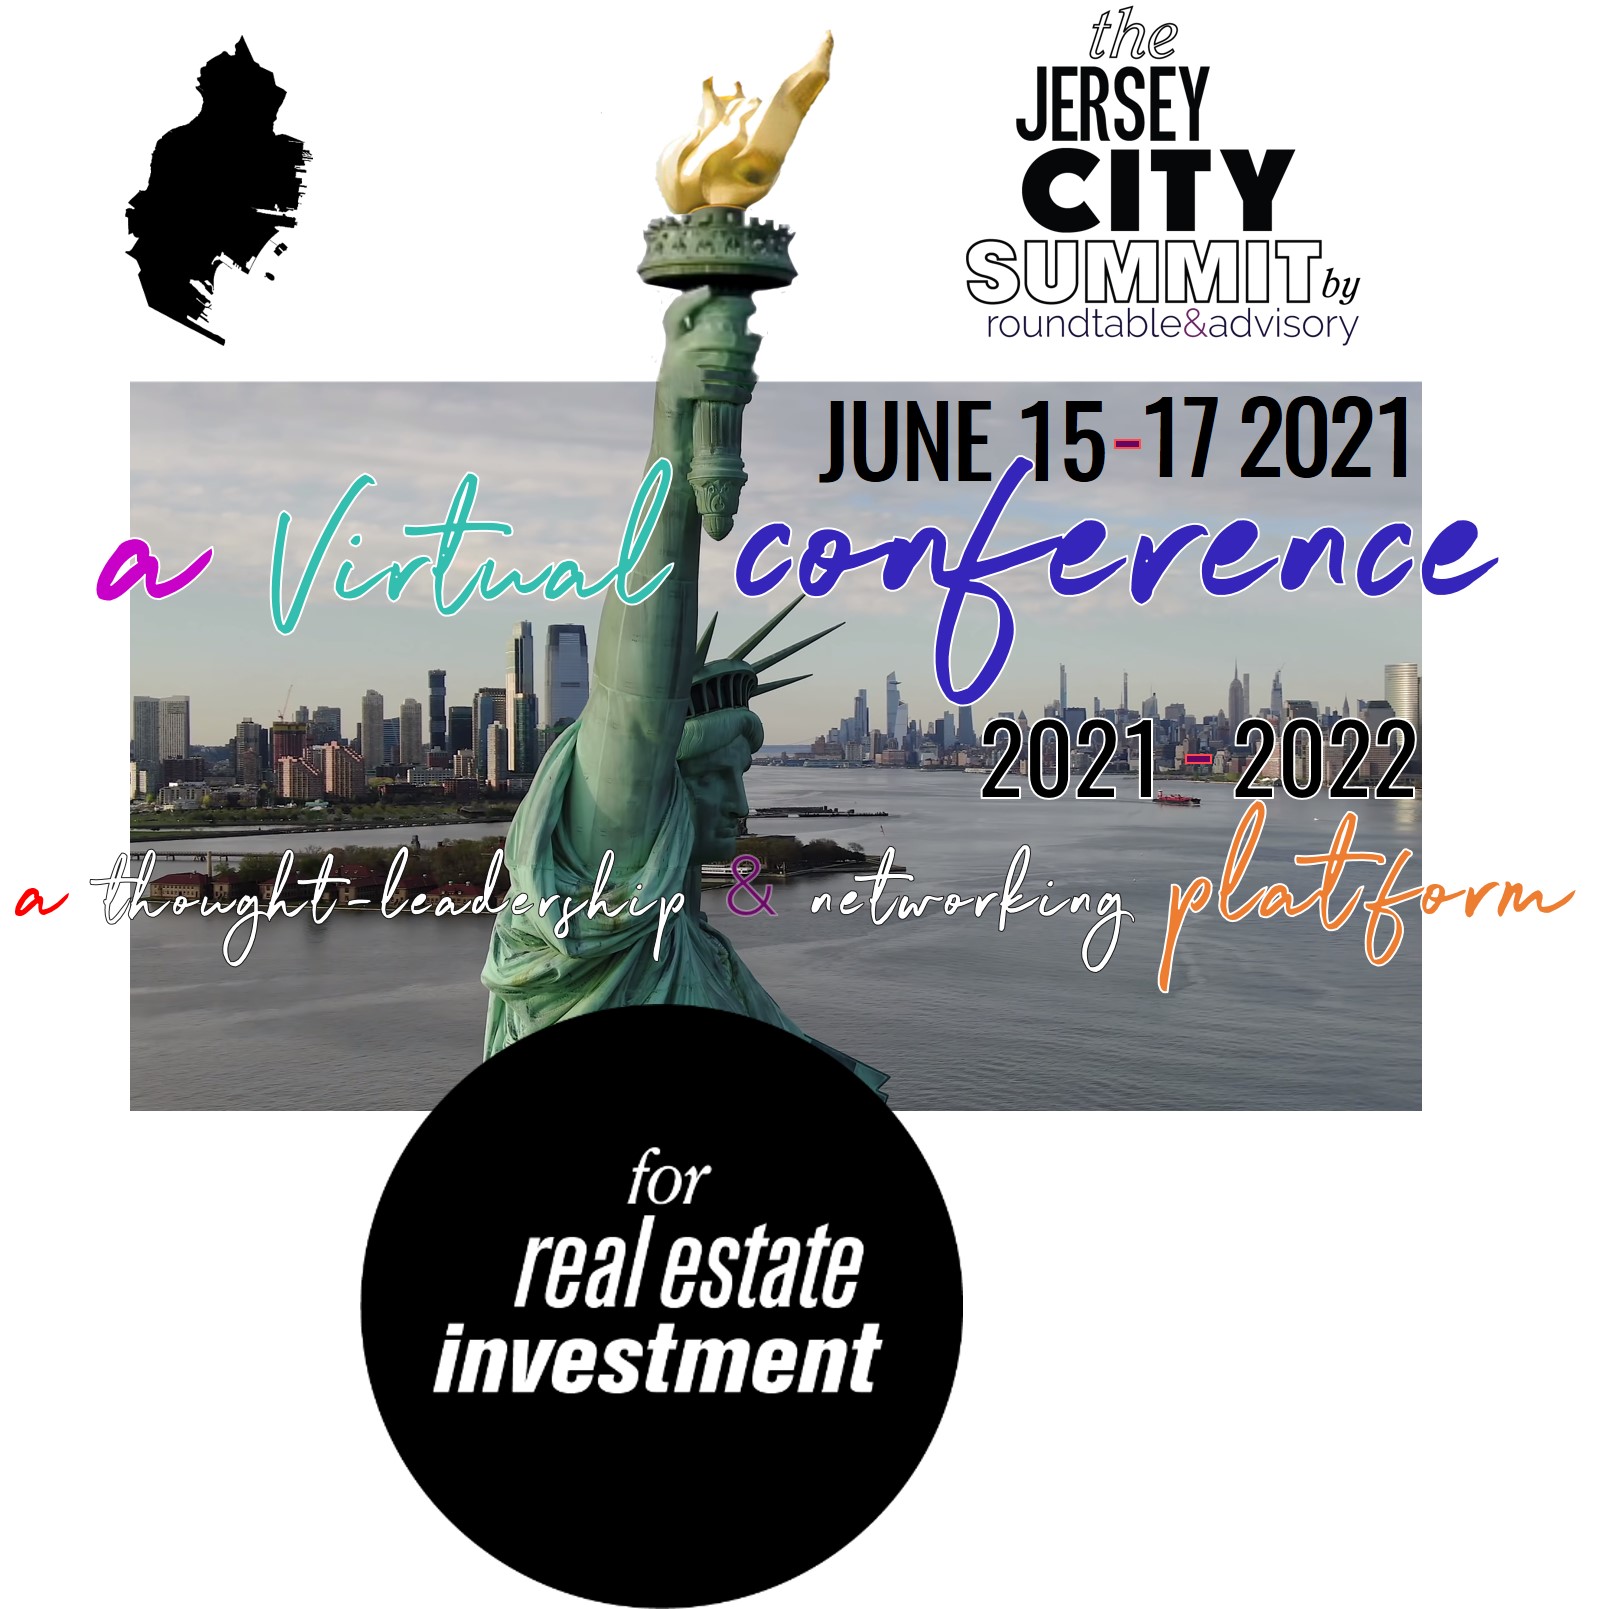 The Jersey City Summit 2021 for Real Estate Investment